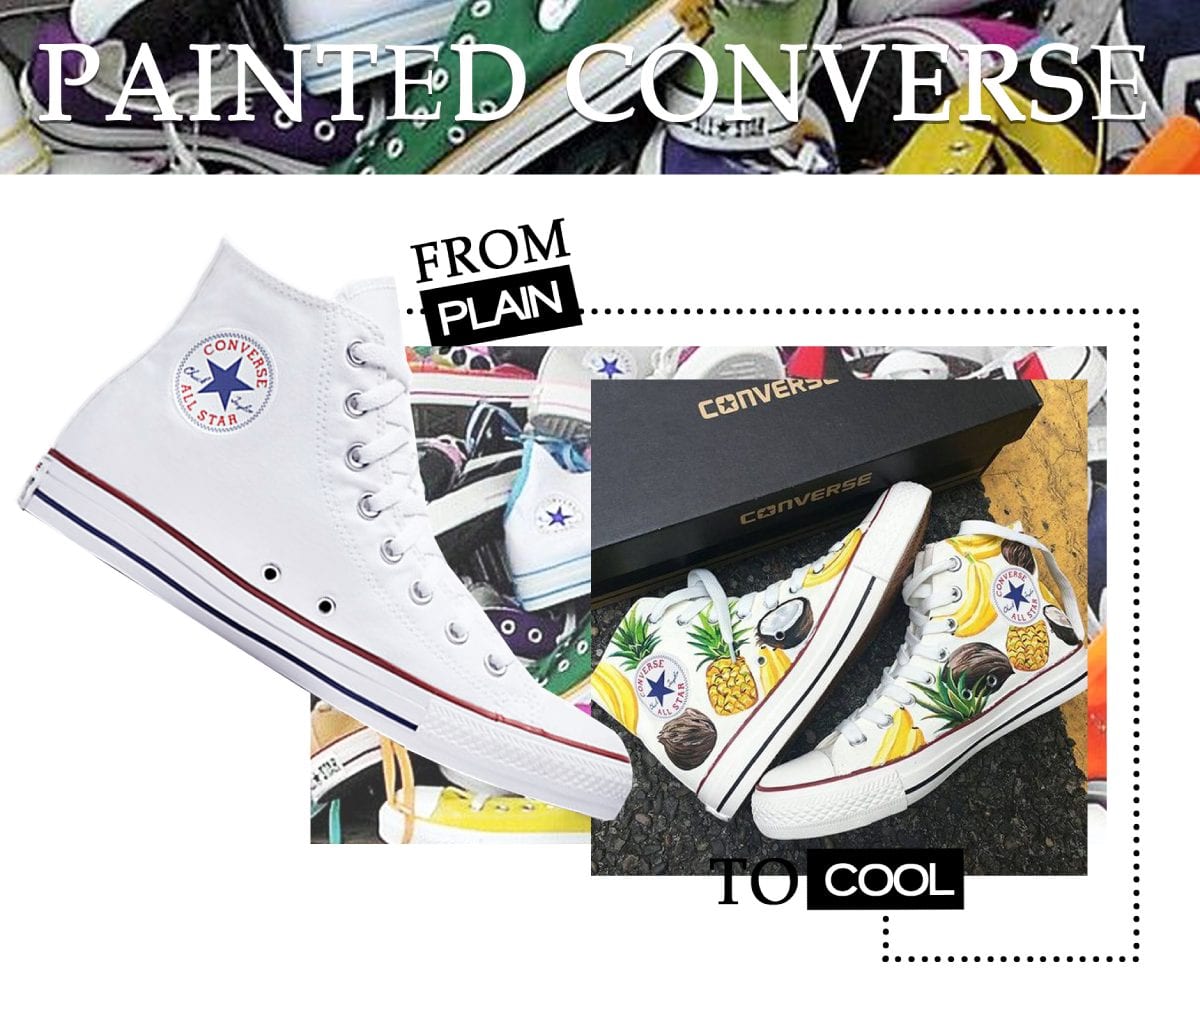 Upcycle Clothes - Painted Converse